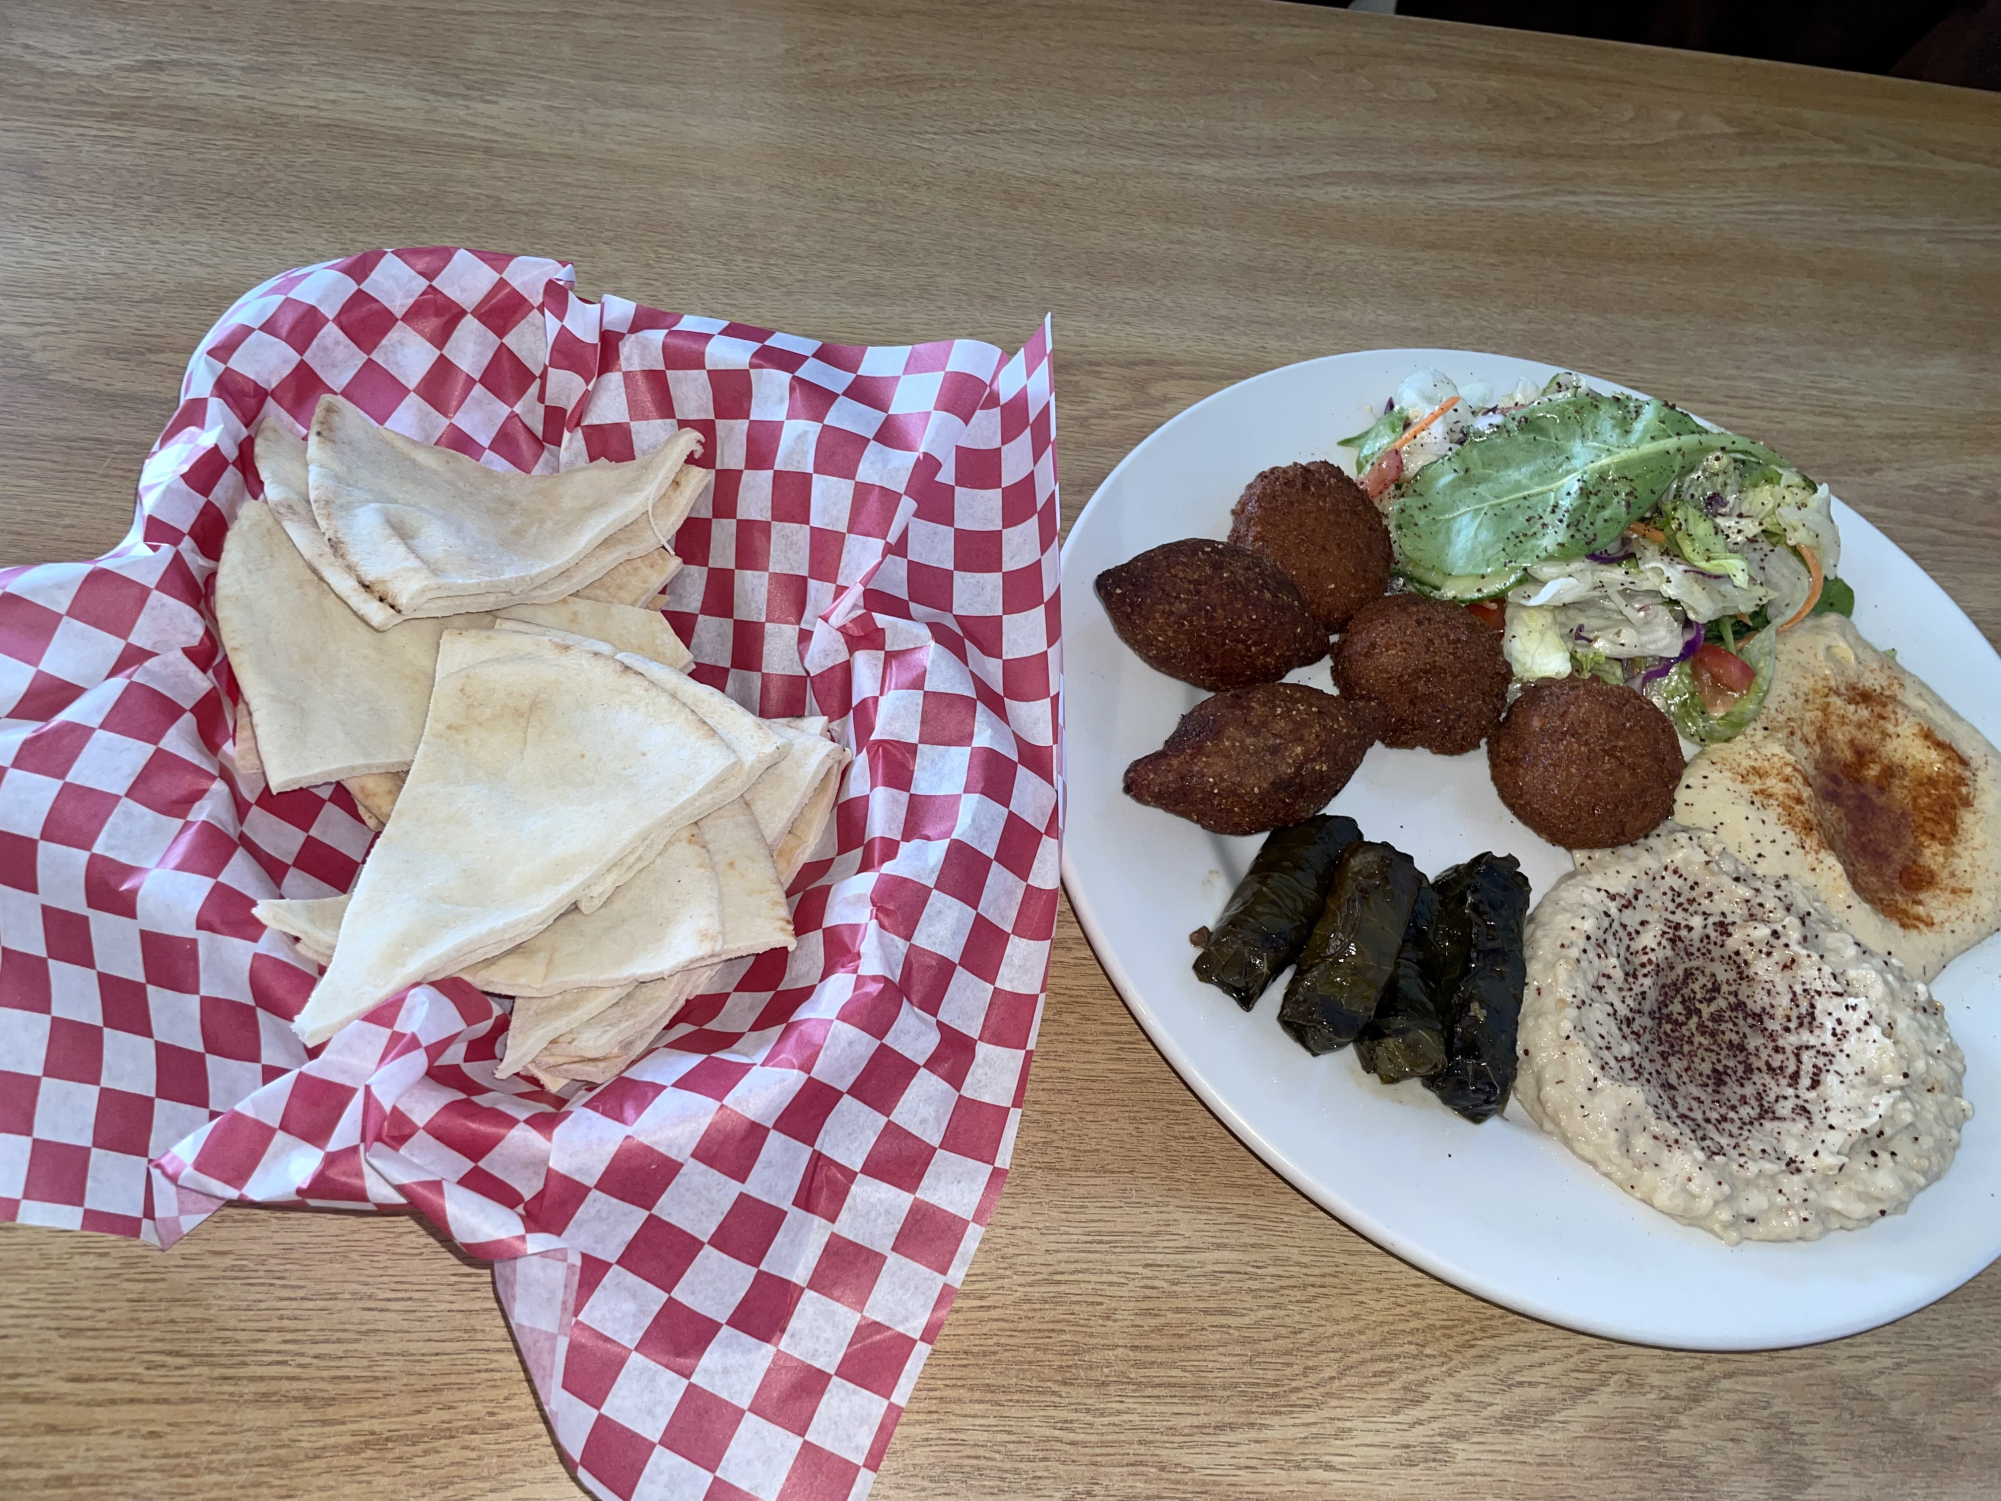 Kababji Grill offers a wide variety of Mediterranean dishes for locals to try, including falafel, stuffed grape leaves and fattoush.